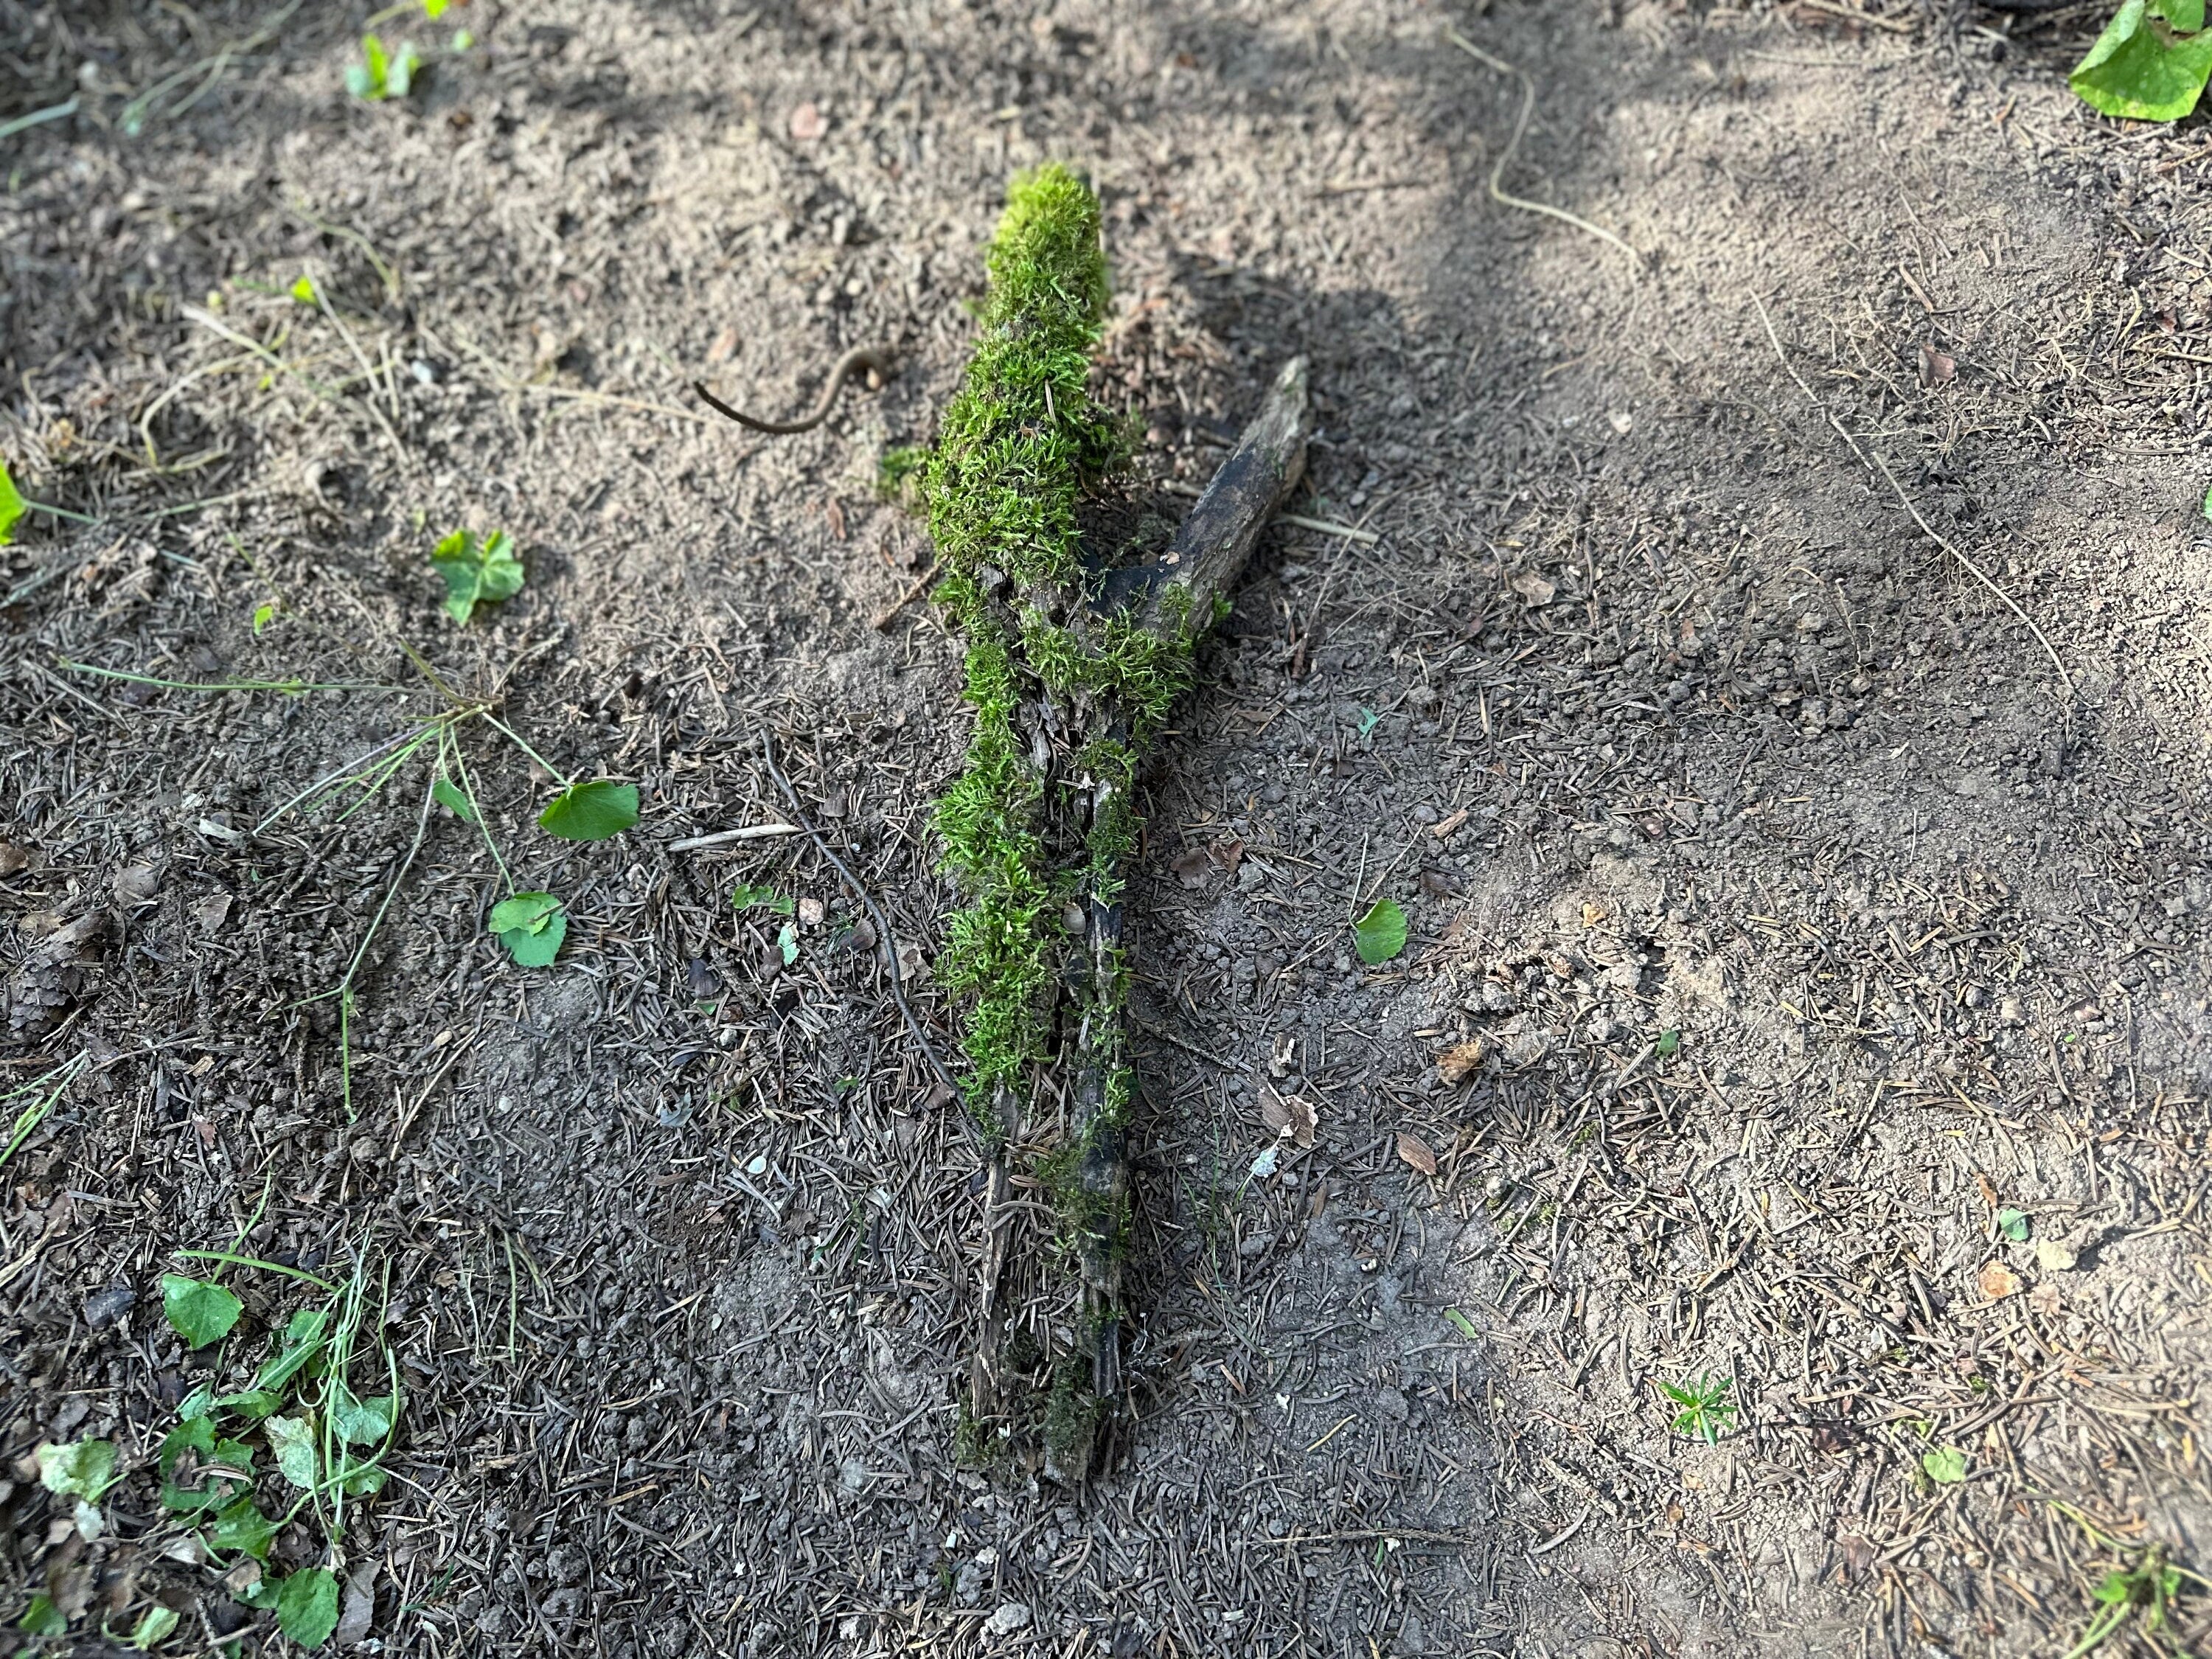 Moss Log, Moss Covered Y-Shaped Log, 14.5 Inches Long by 5 Inches Wide and 1 Inch High